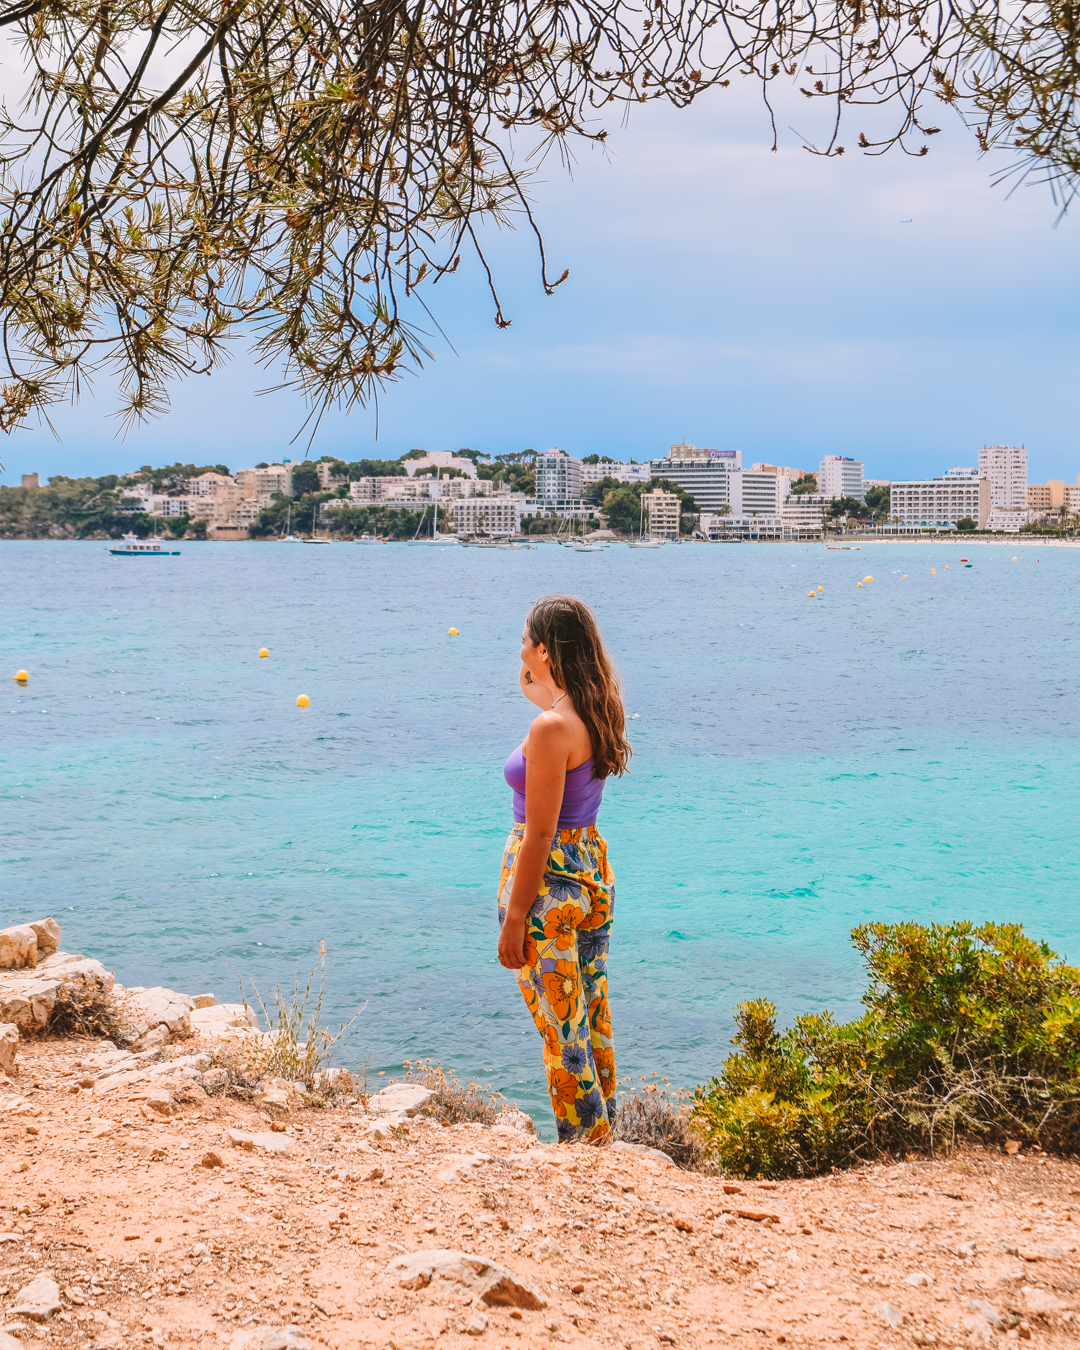 Visit Palmanova and Magaluf - Best places to visit in Mallorca